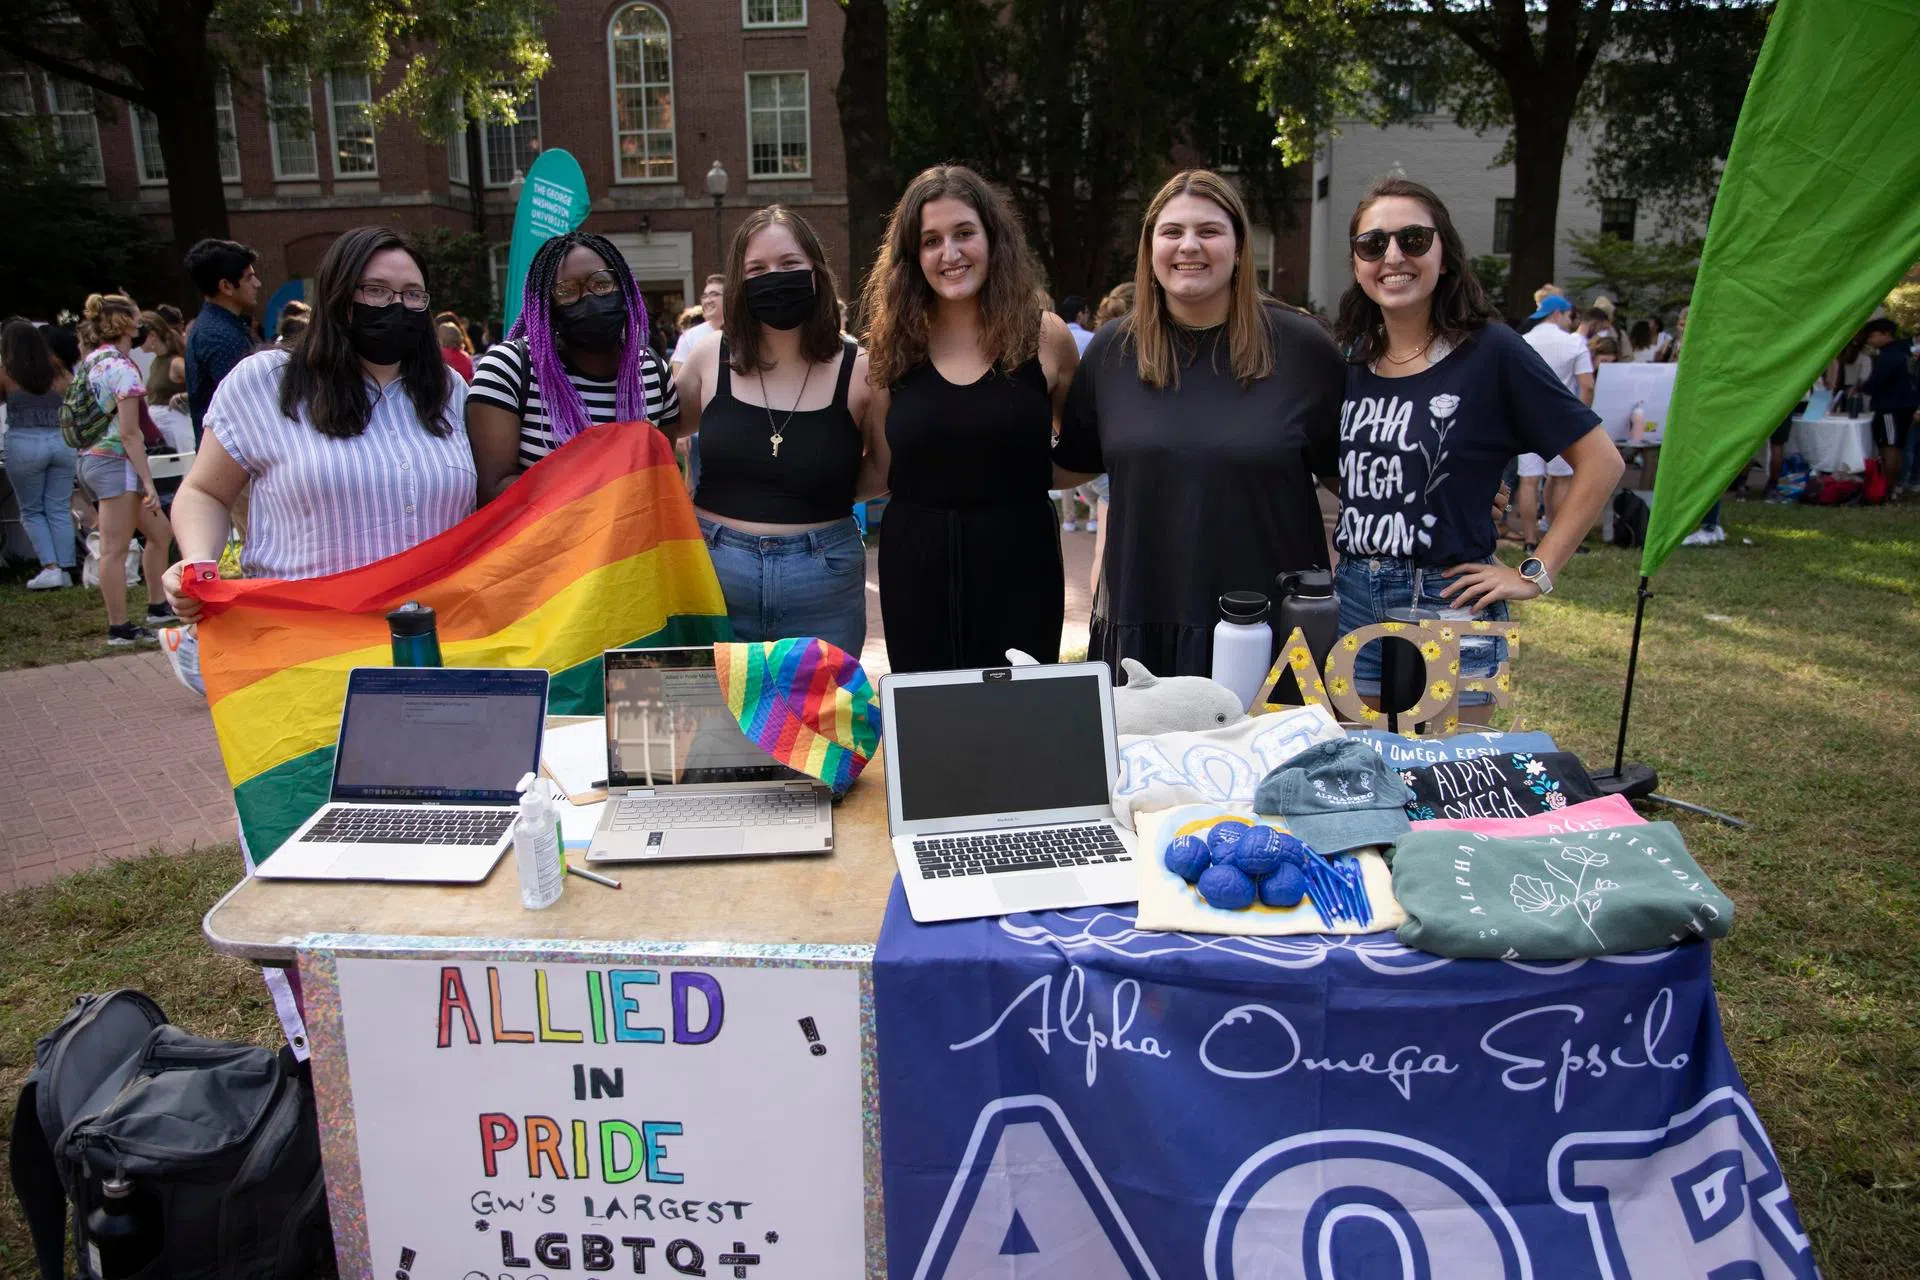 Students table for Allied in Pride and Alpha Omega Epsilon